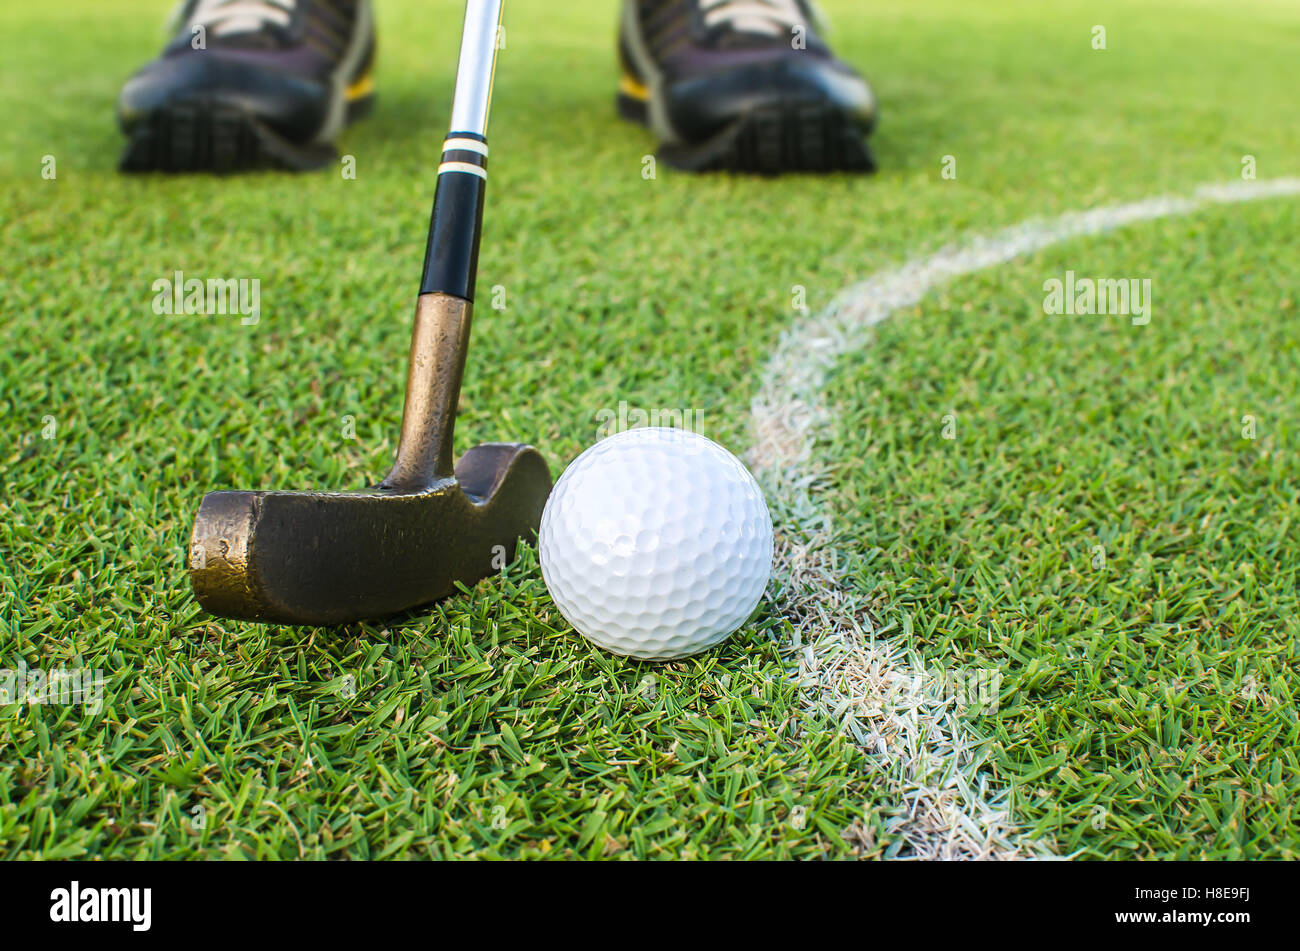 Golf player at the putting green hitting ball into a hole Stock Photo